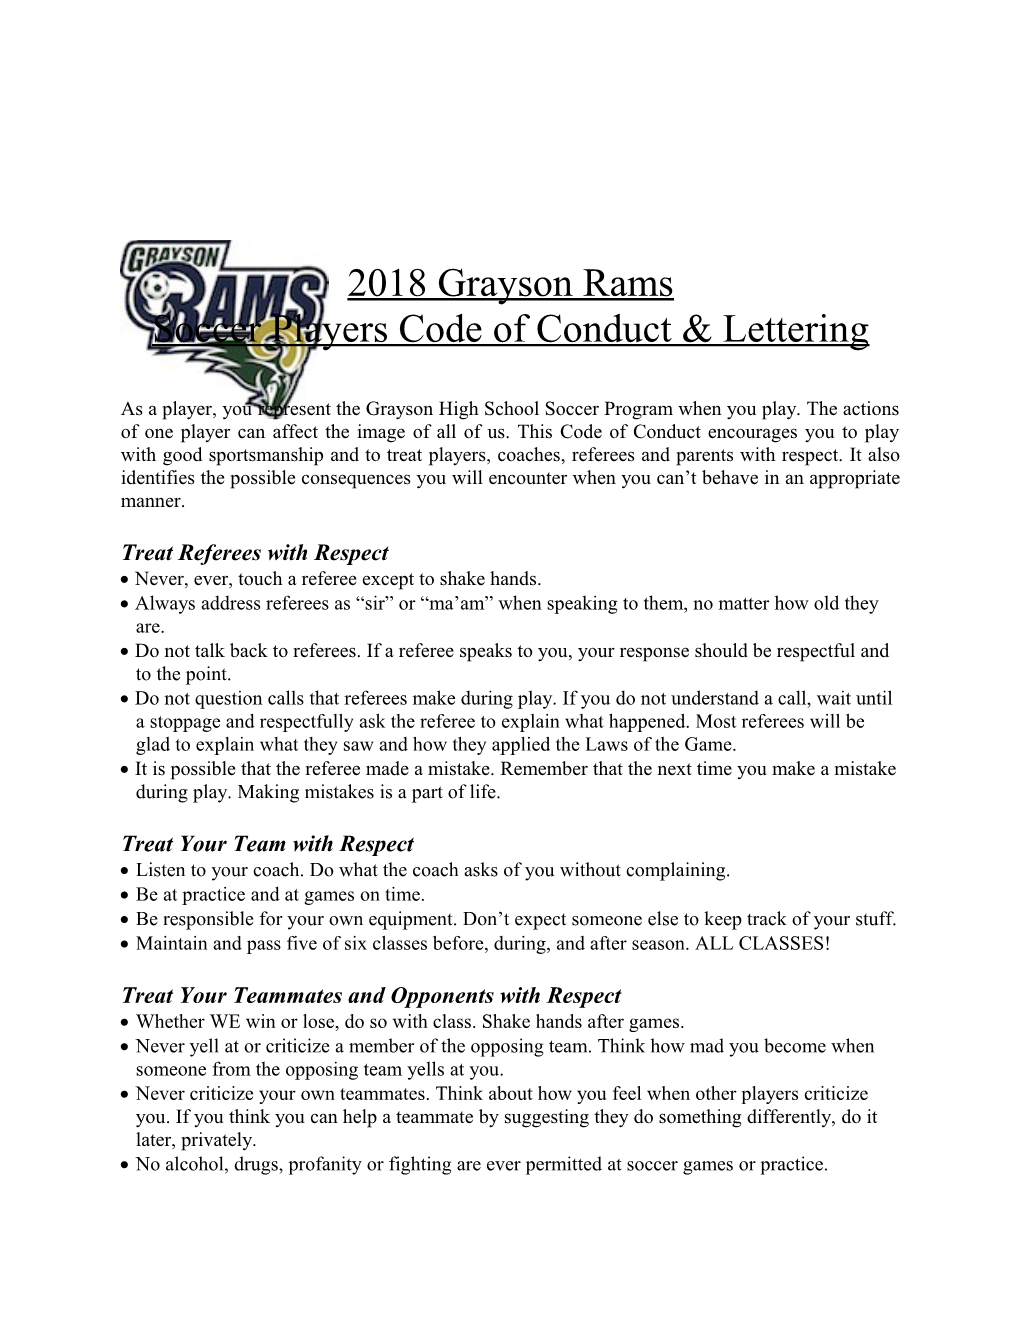 Soccer Players Code of Conduct & Lettering